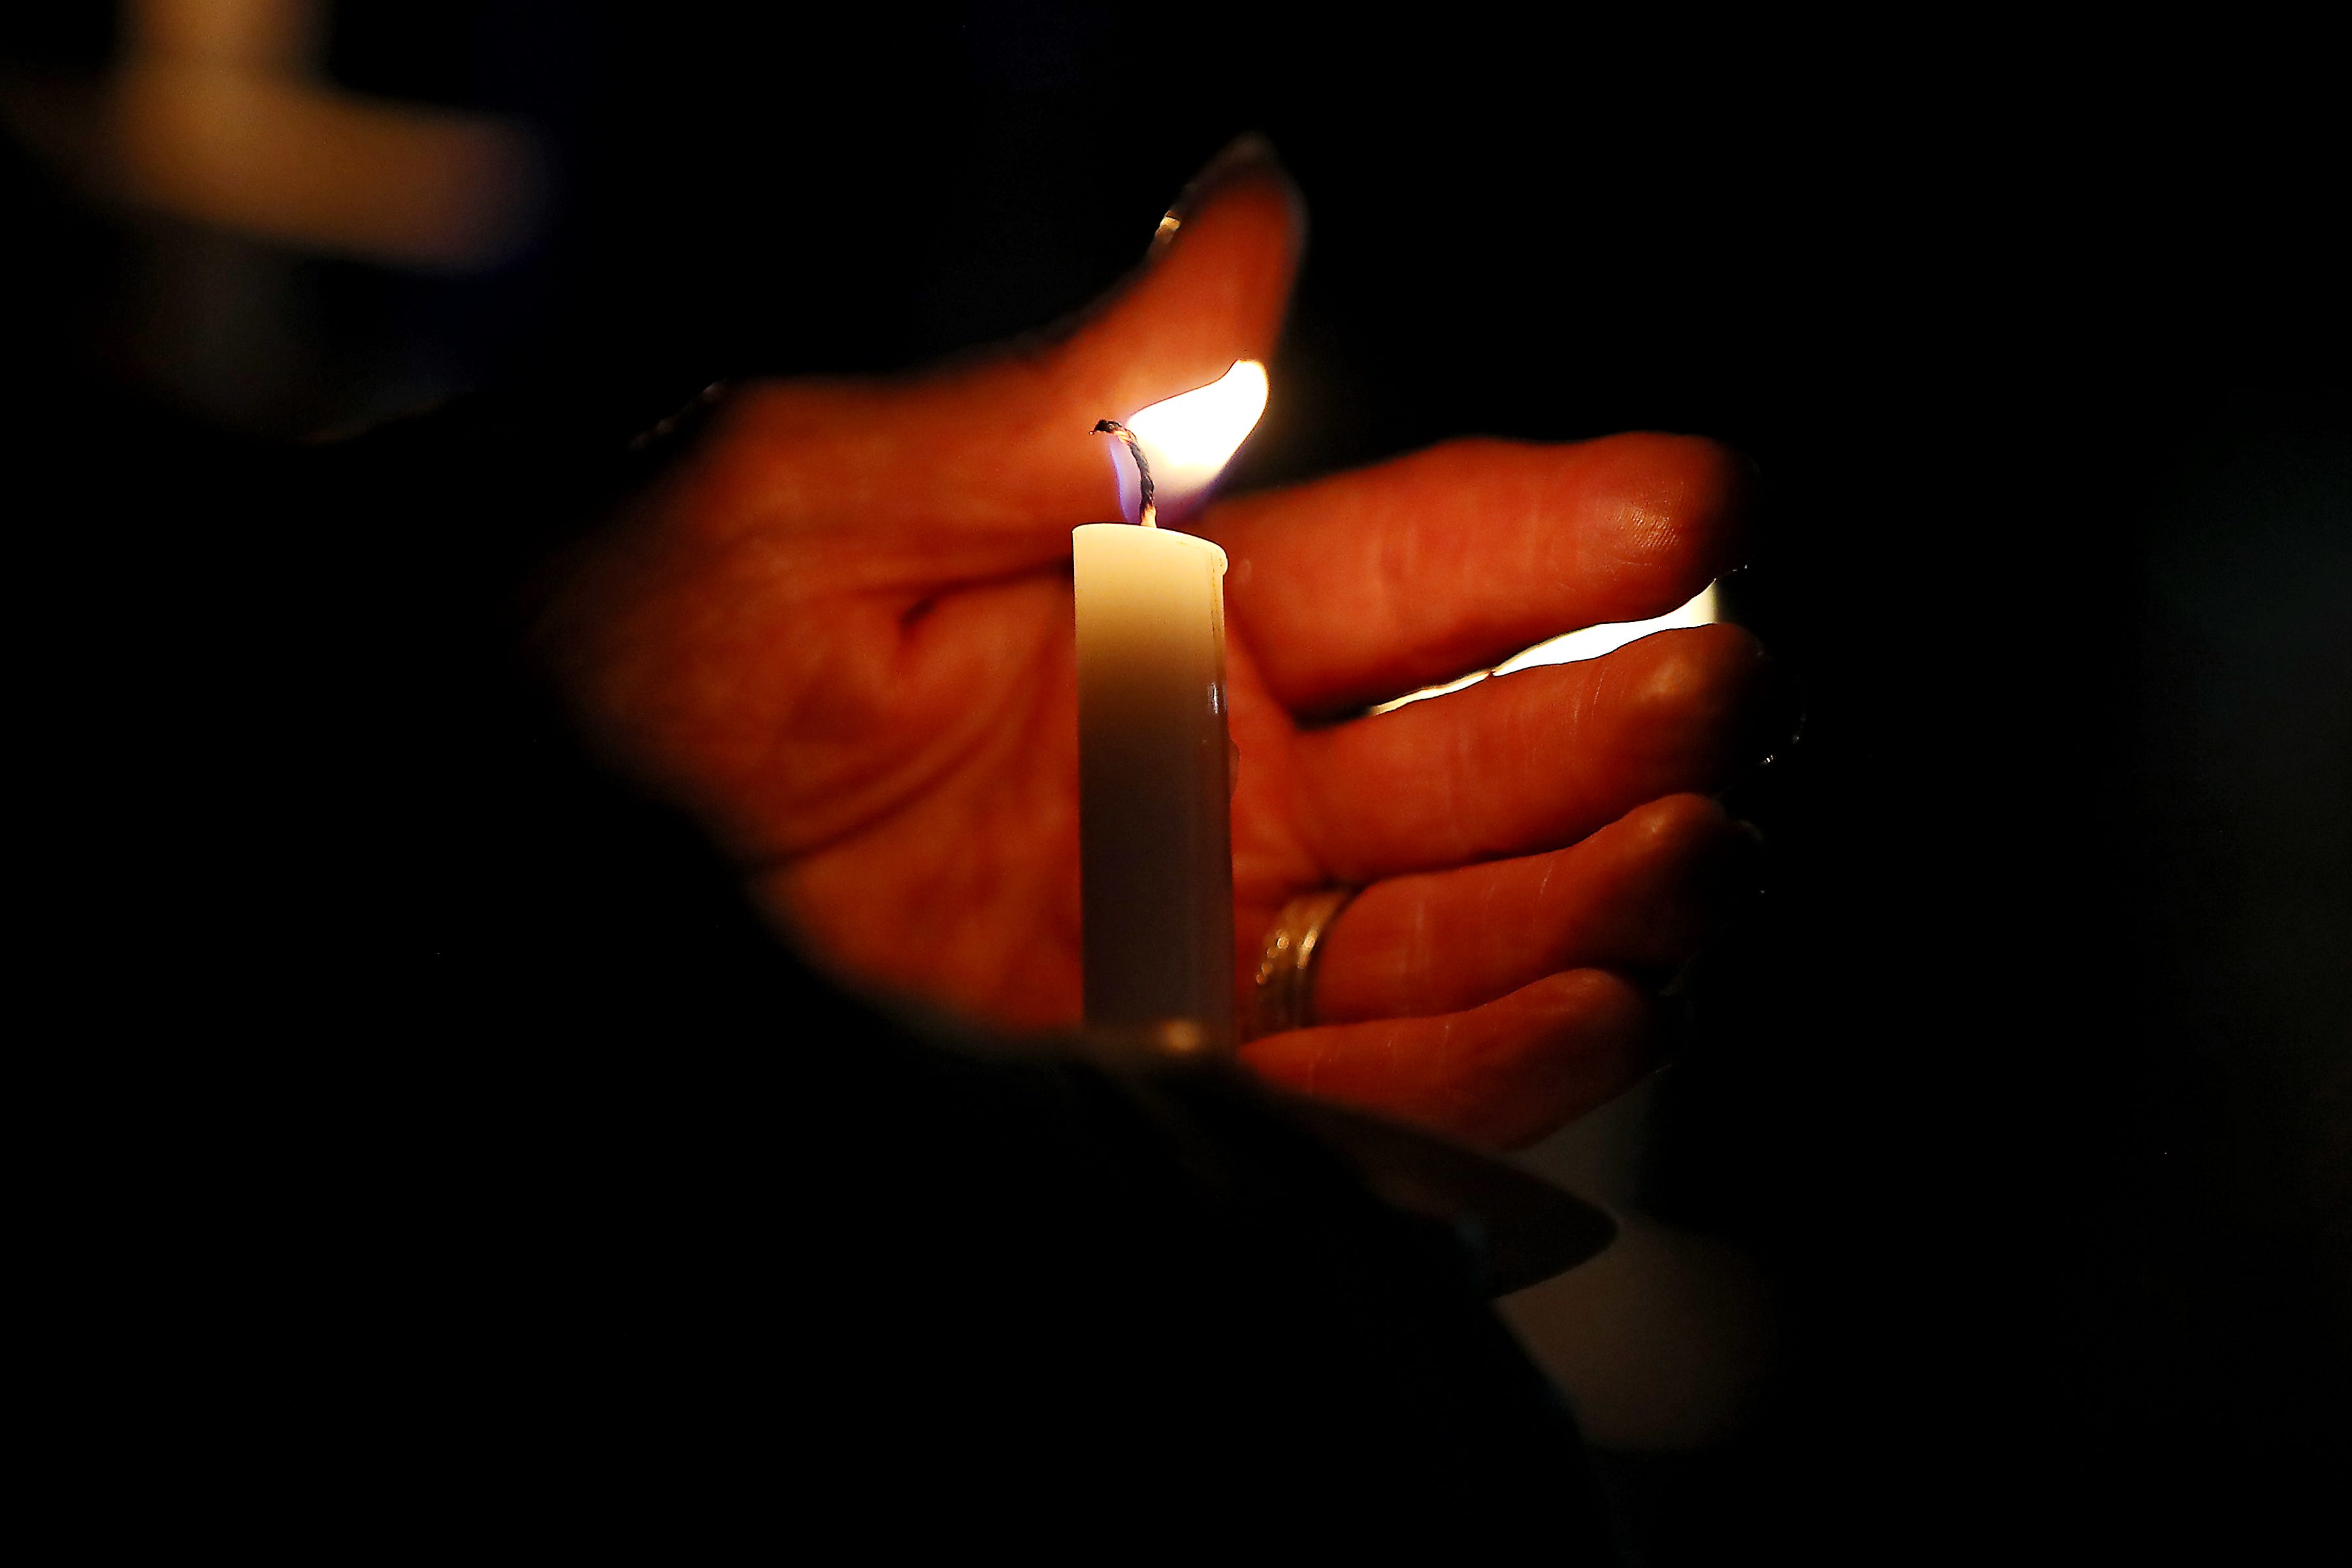 A person tries to block the wind from blowing out their candle during a candlelight vigil in downtown Oxford on Friday, Dec. 3, 2021.